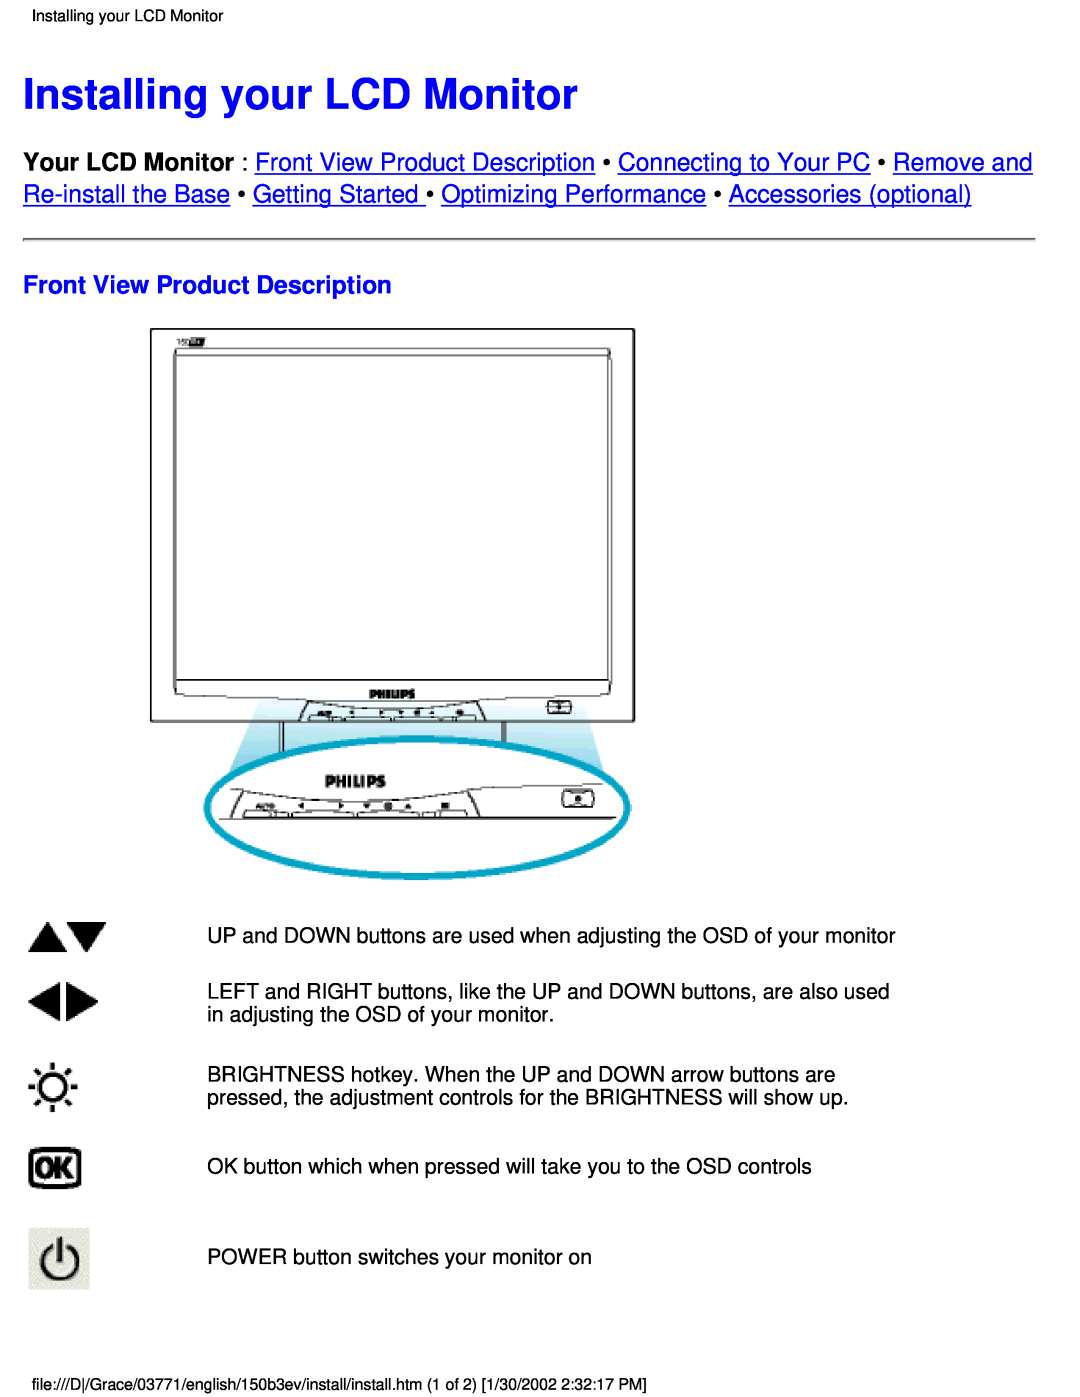 Philips 150B3E, 150B3V user manual Installing your LCD Monitor, Front View Product Description 